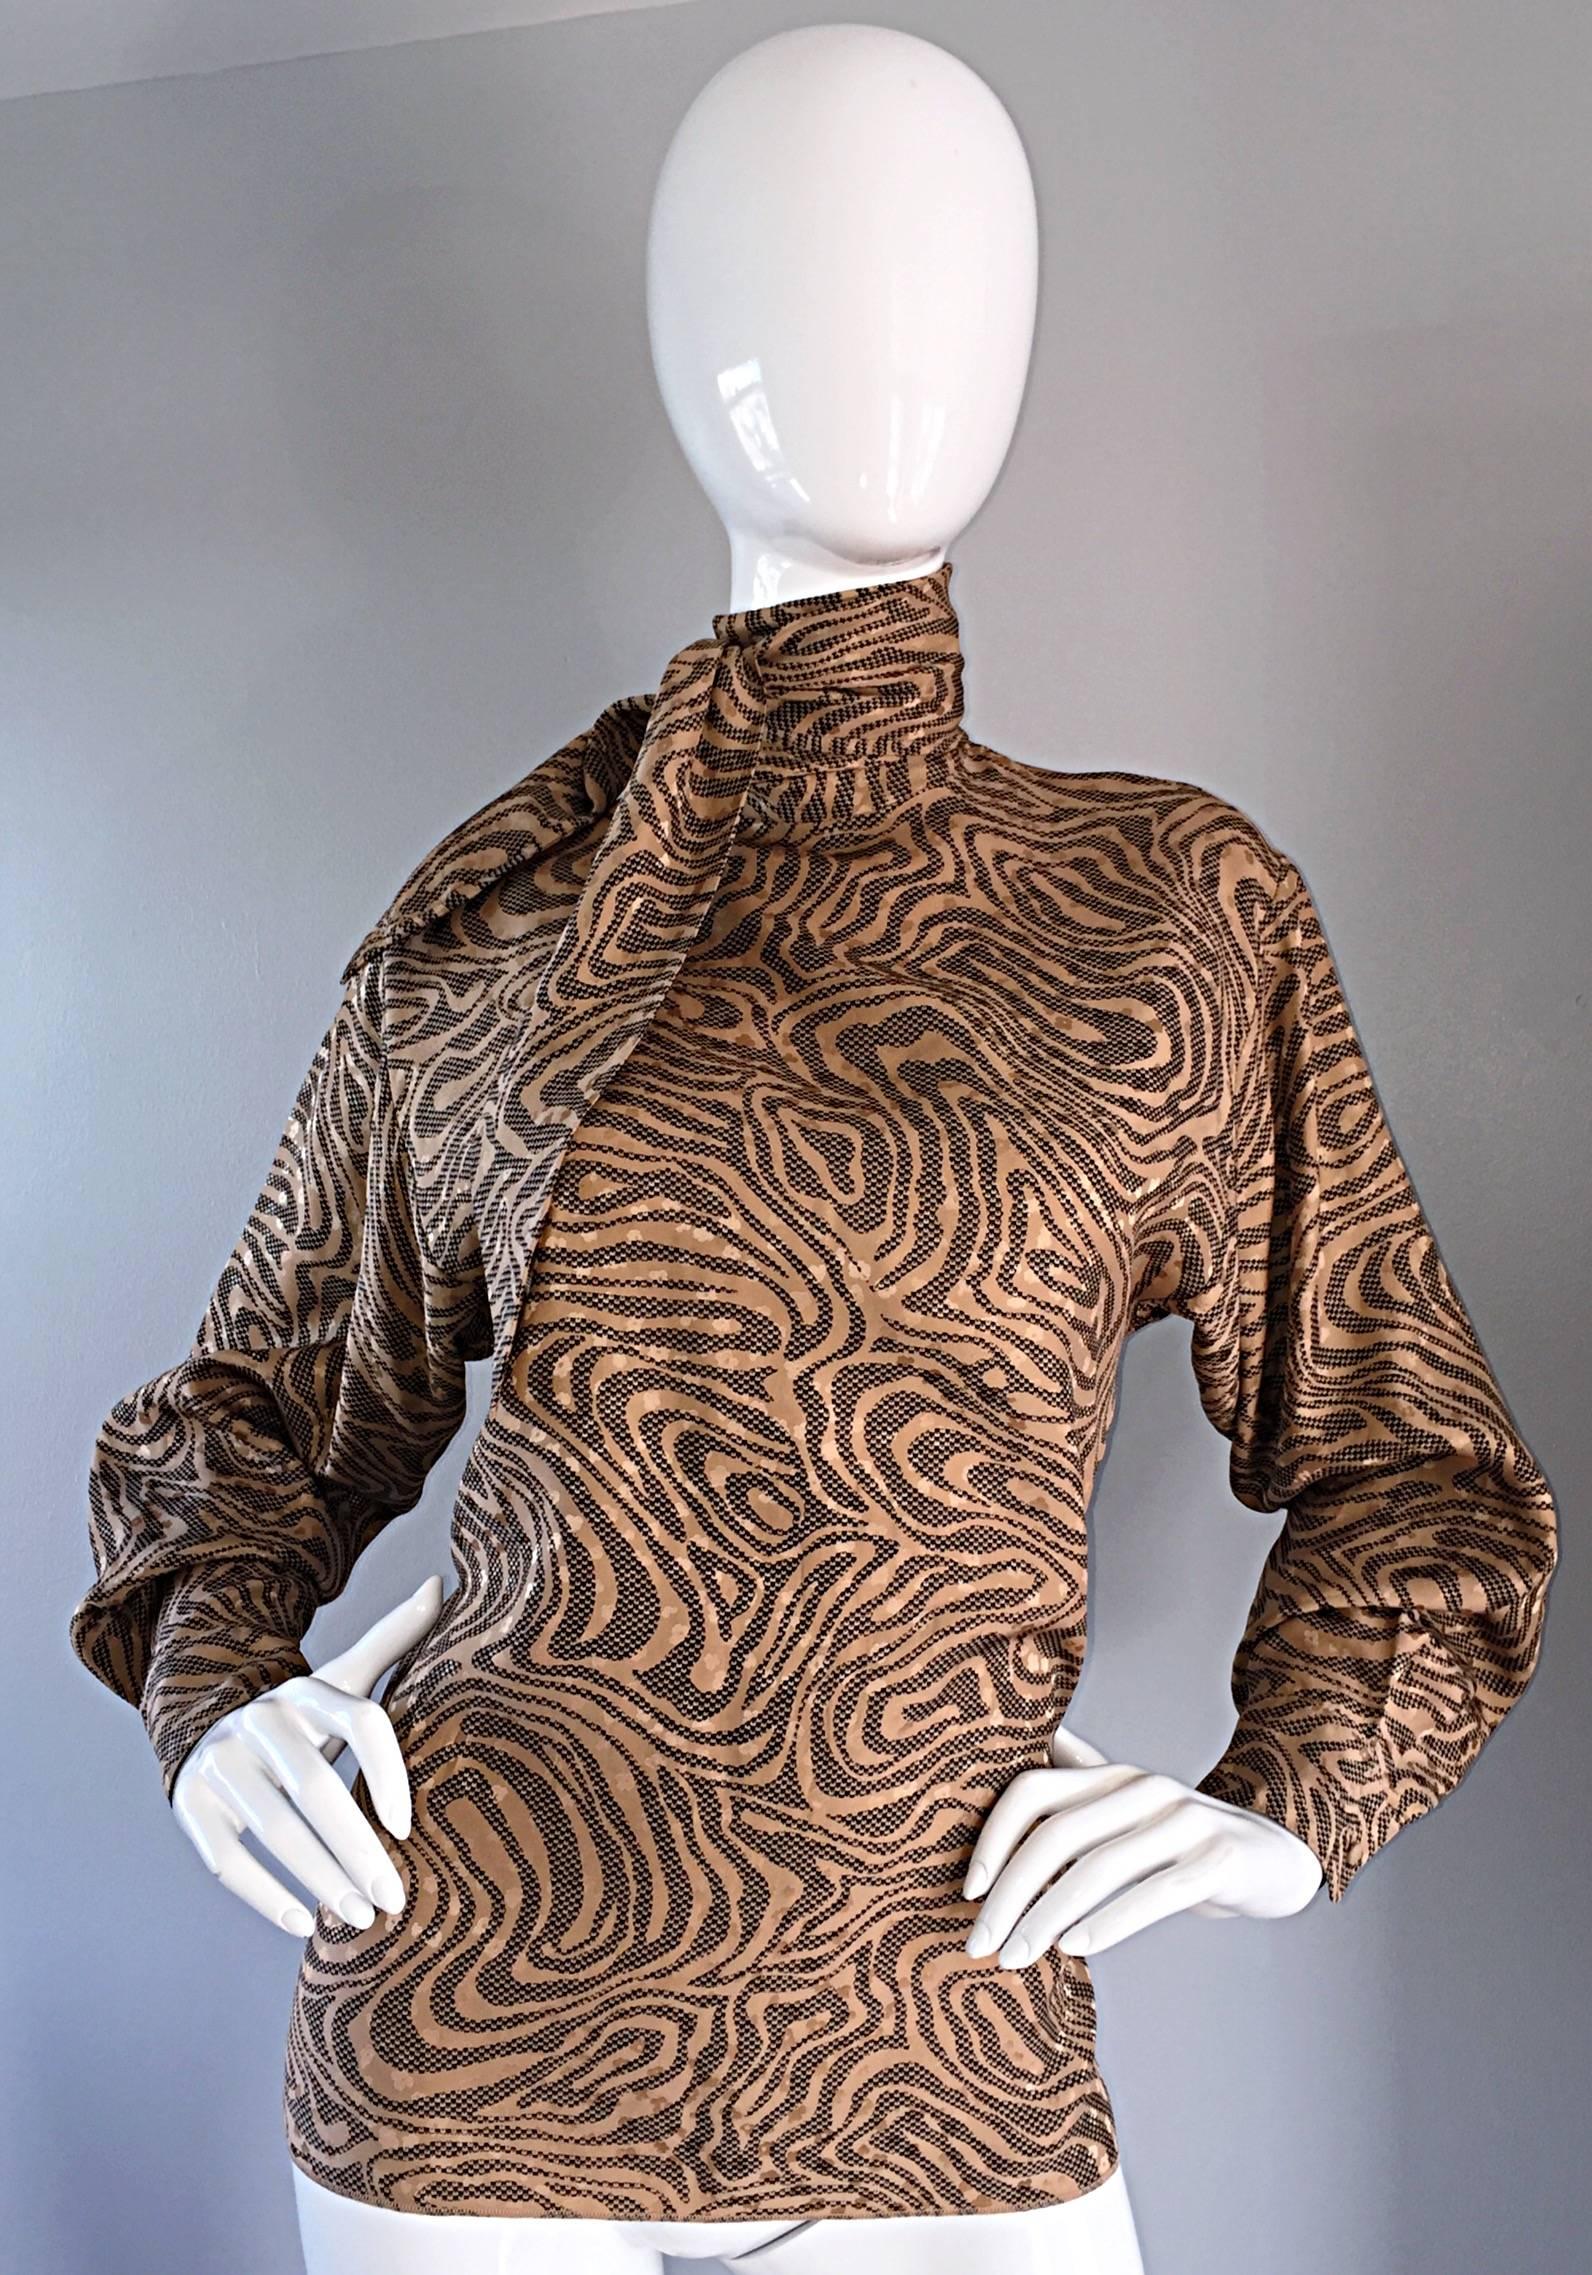 Chic vintage early 1990s / 90s St. John tan, brown, and black silk blouse! Dolman sleeves, with tie at neck, which can be tied in a variety of ways. Amazing animal print, in a swirled design, with flower motifs throughout. Buttons up the back. Can